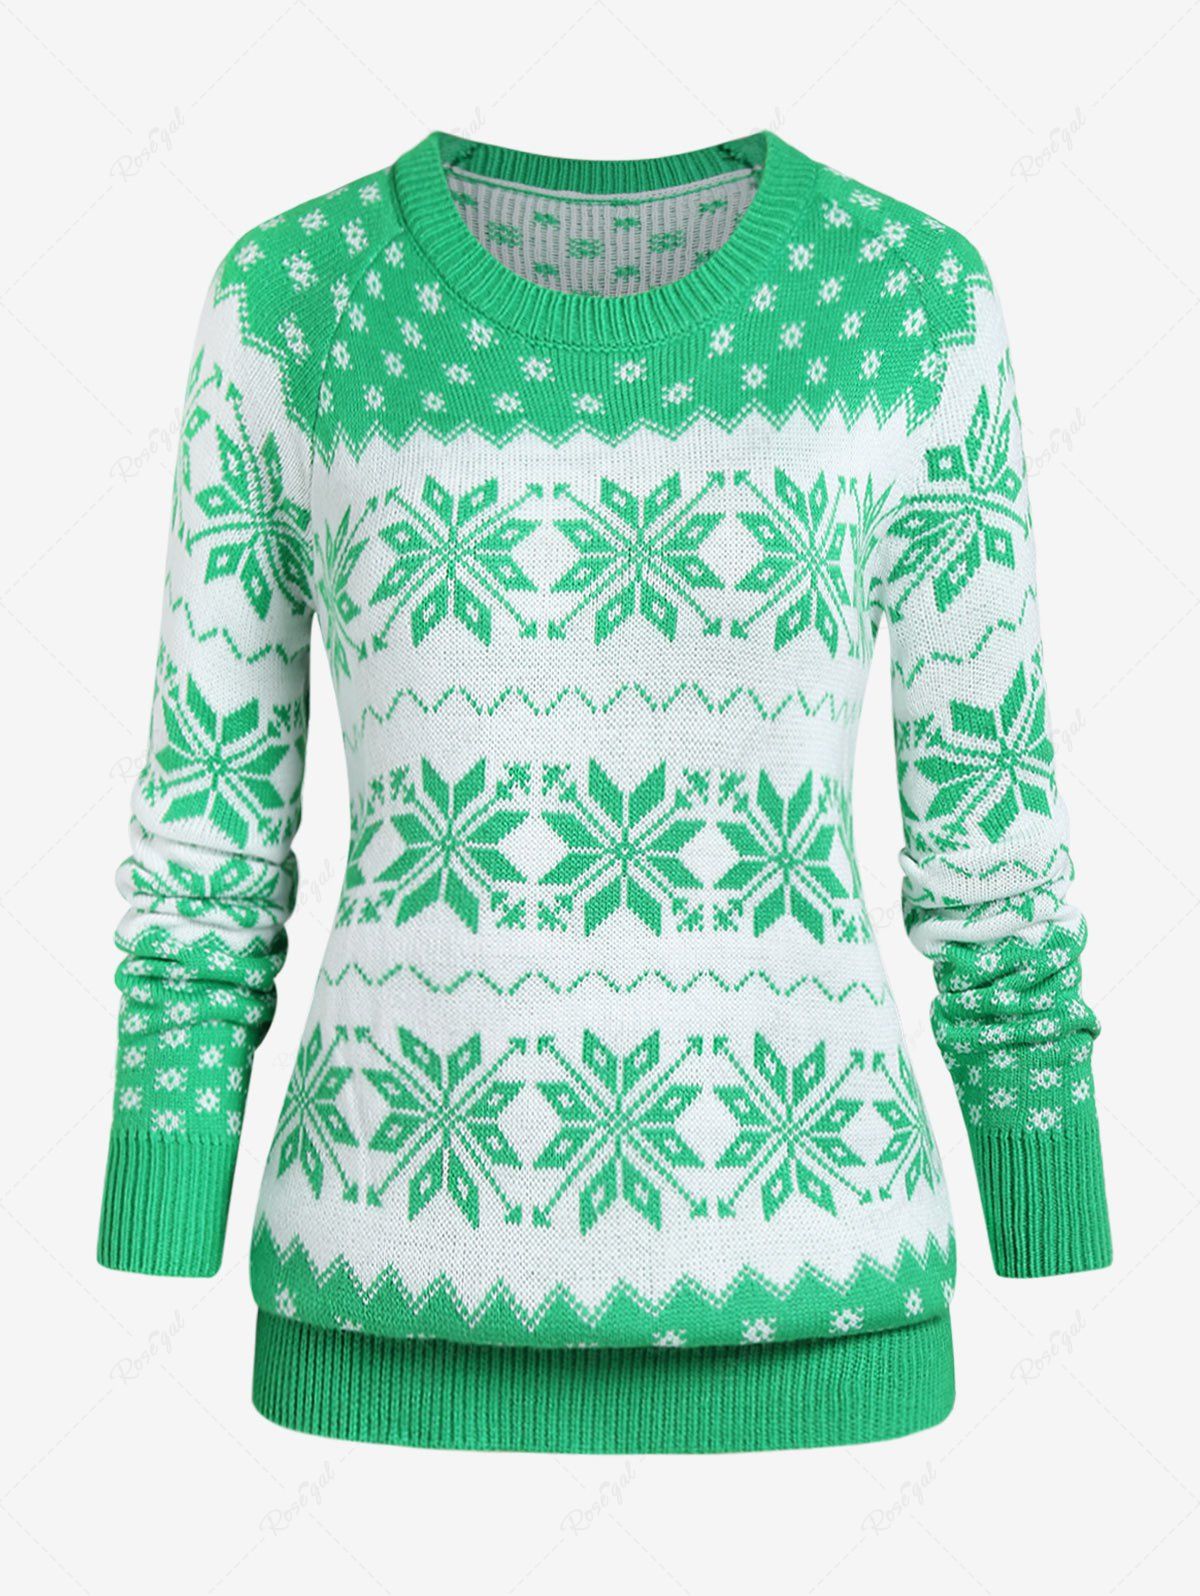 Outfit Plus Size Snowflake Christmas Sweater  